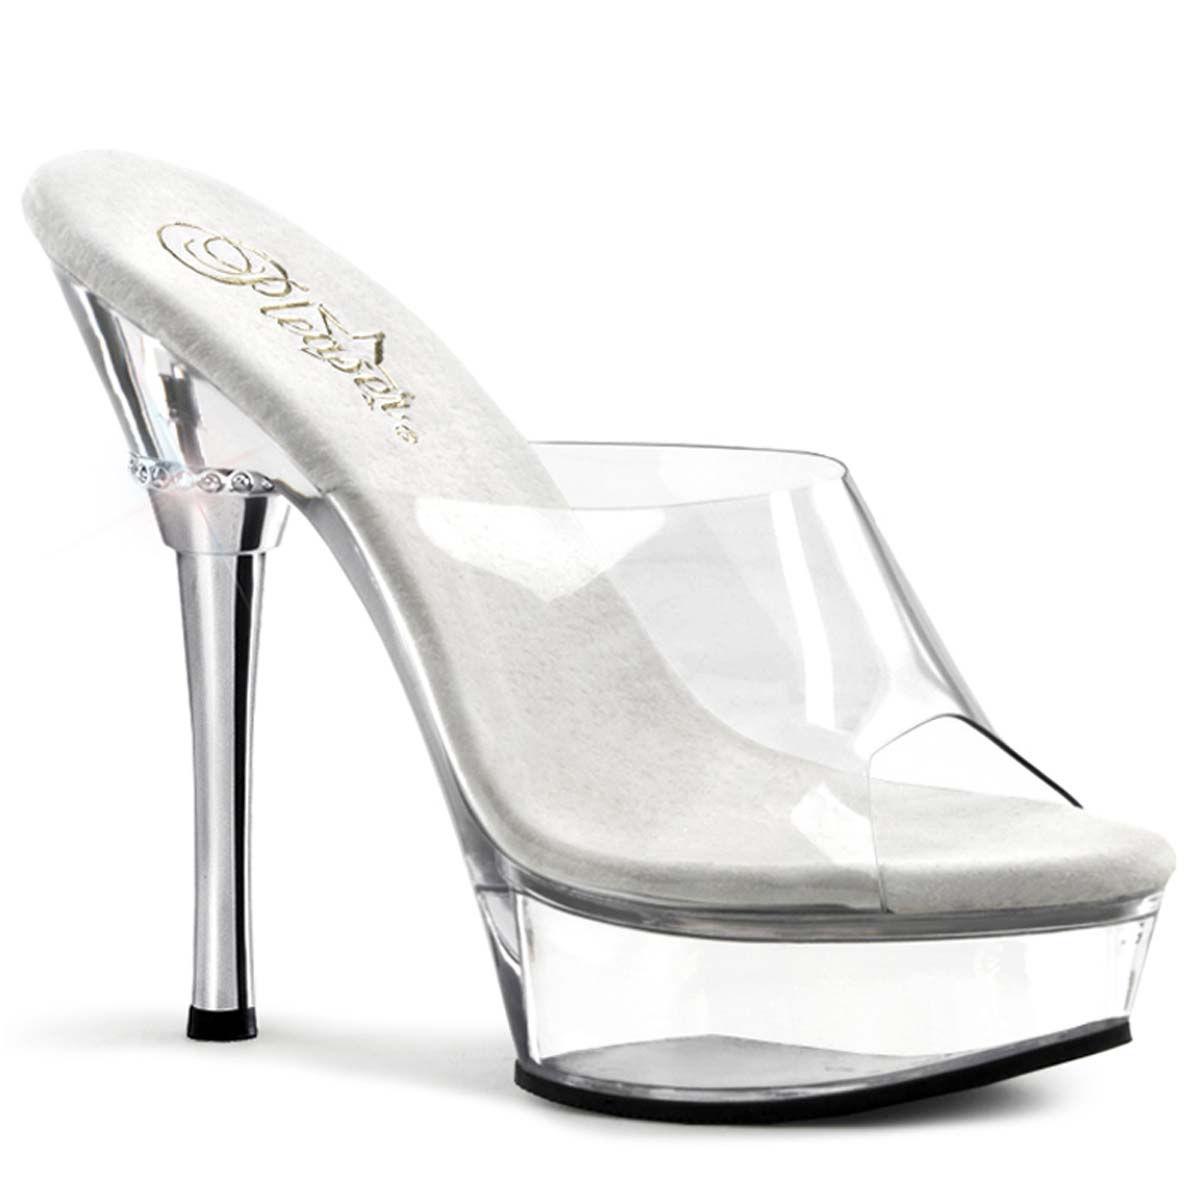 Pleaser Allure-601 - Clear/Clear in Sexy Heels & Platforms - $53.95